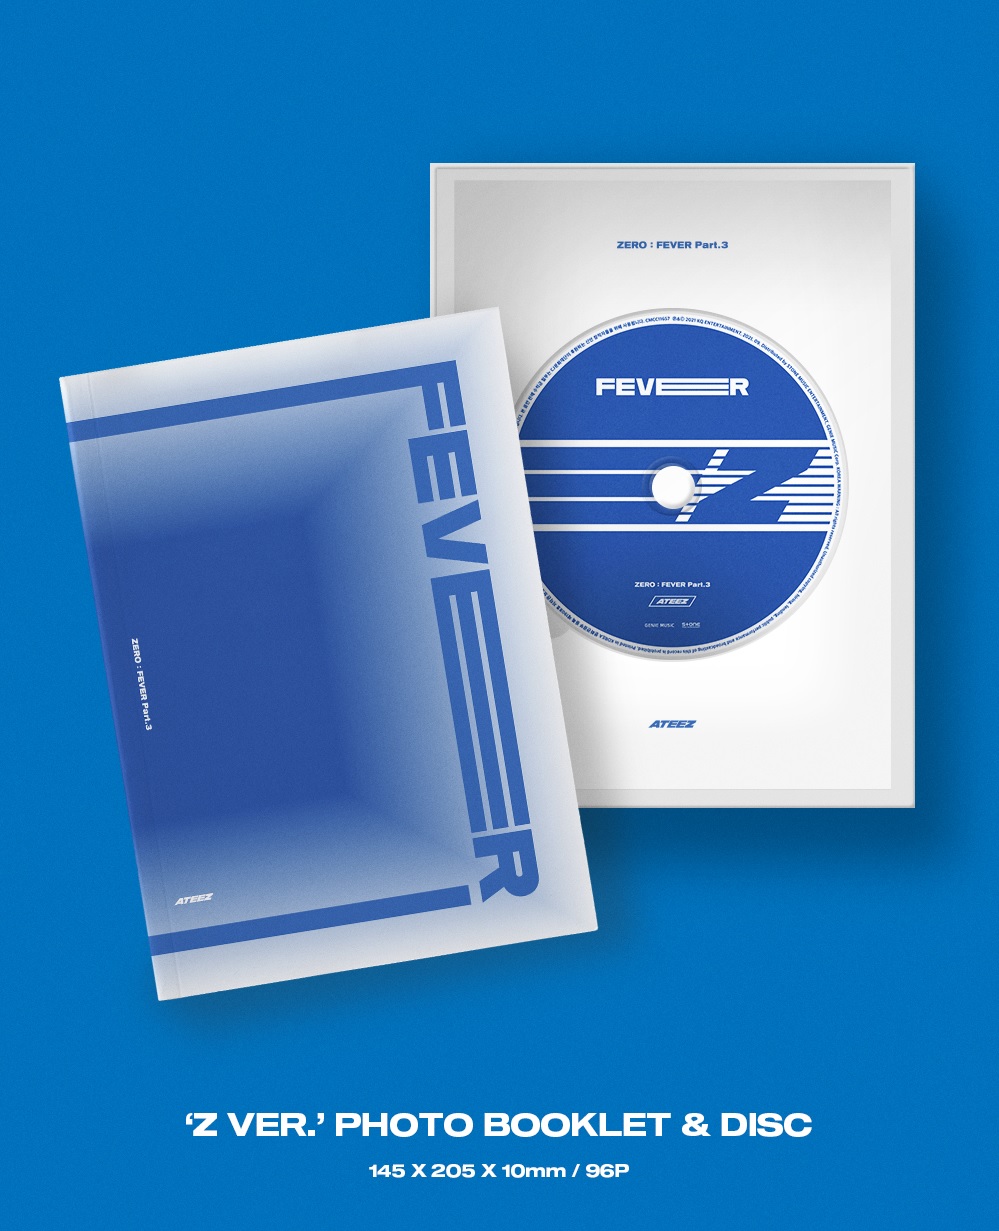 All A+Diary+Z Set ATEEZ ZERO:FEVER Part 3 Mini Album Vol.6 Incl. First Press Only Folded Poster